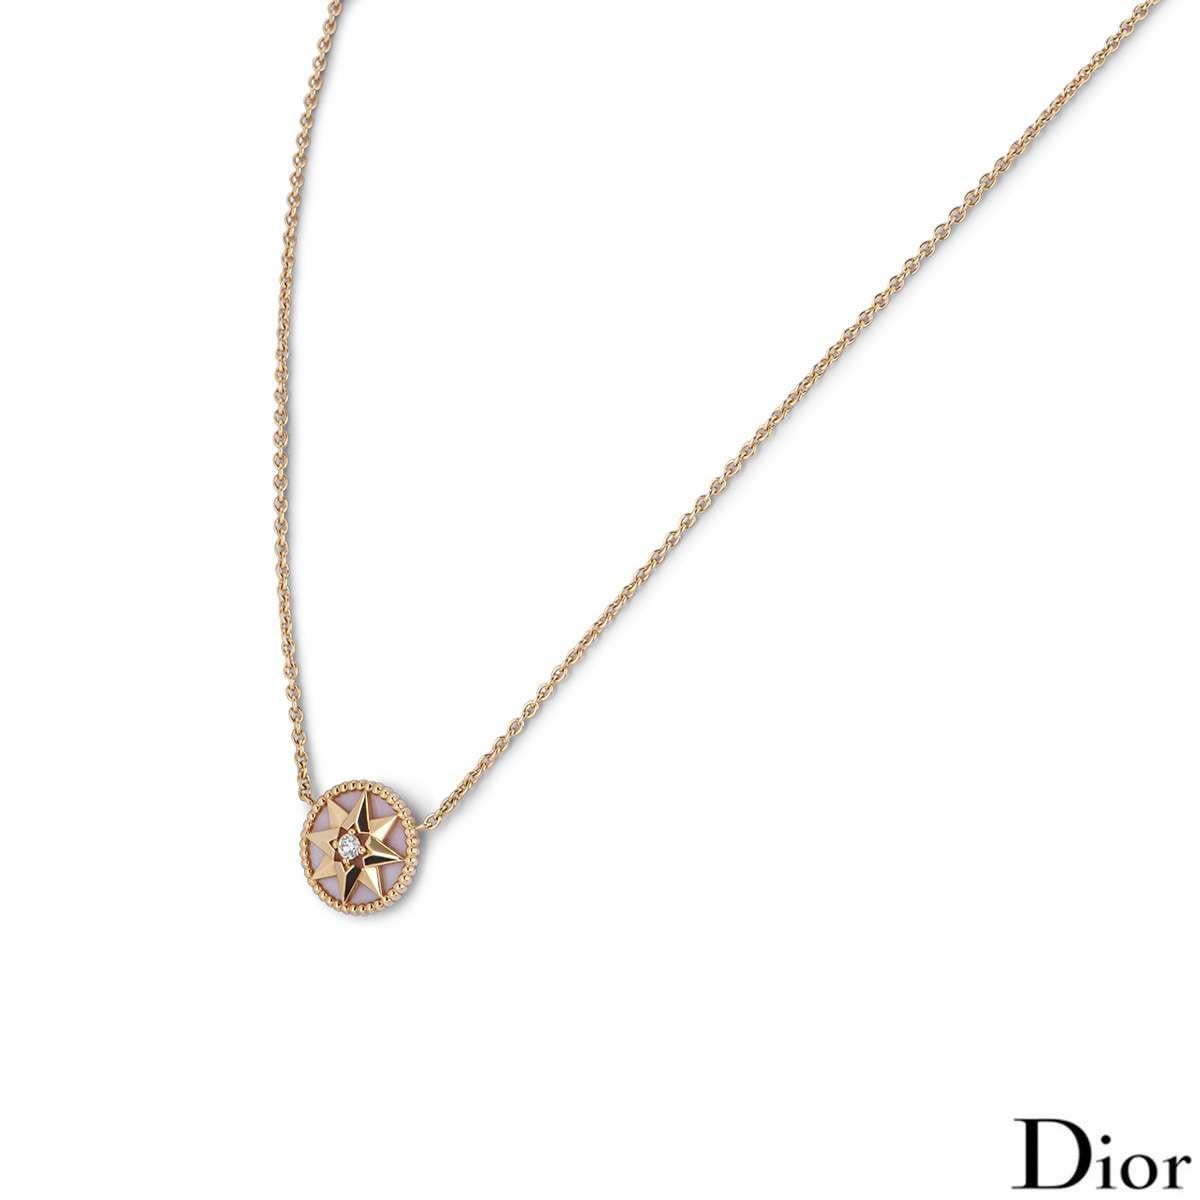 An 18k rose gold diamond and pink opal Dior necklace from the Rose des Vents collection. The necklace features a pink opal circular motif with a rose gold star set to the centre with a round brilliant cut diamond with an approximate weight of